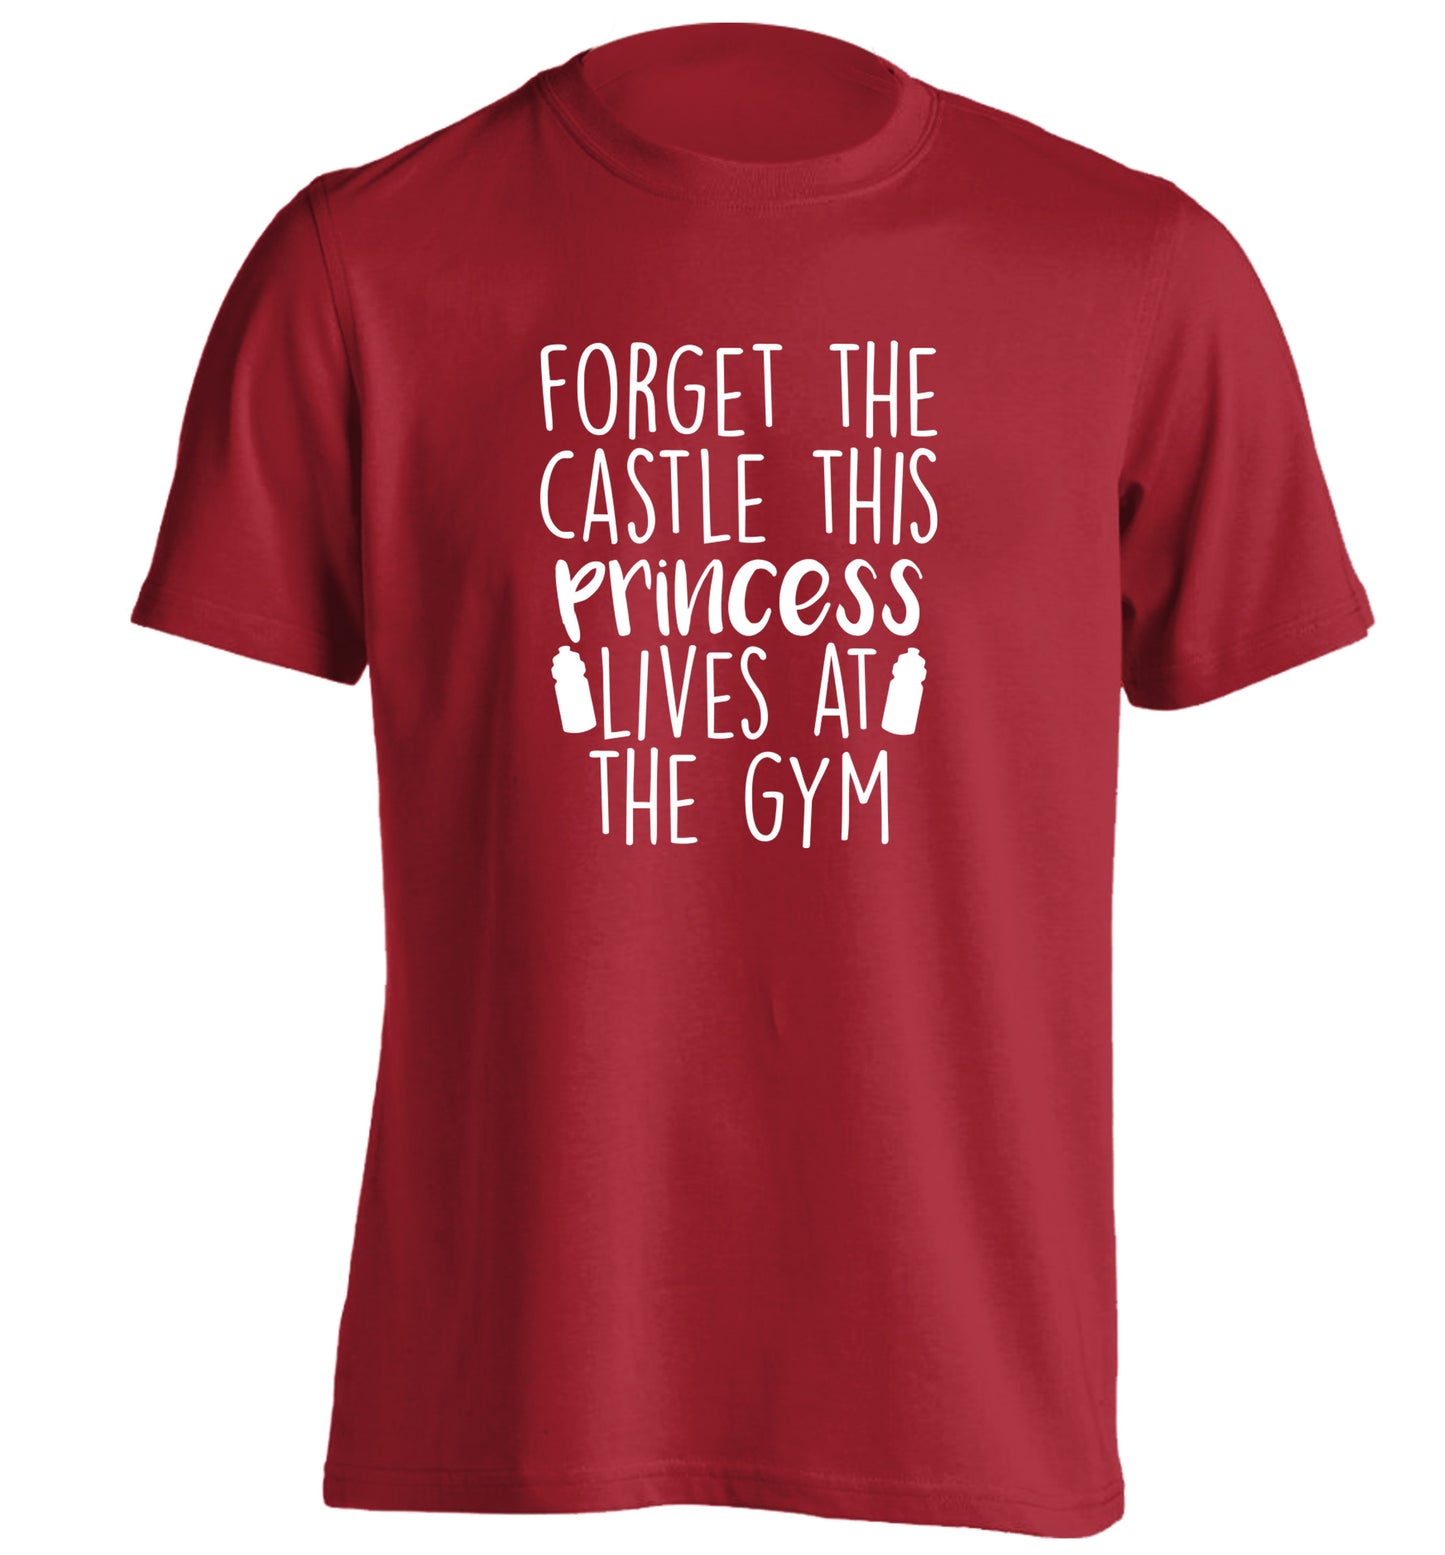 Forget the castle this princess lives at the gym adults unisex red Tshirt 2XL